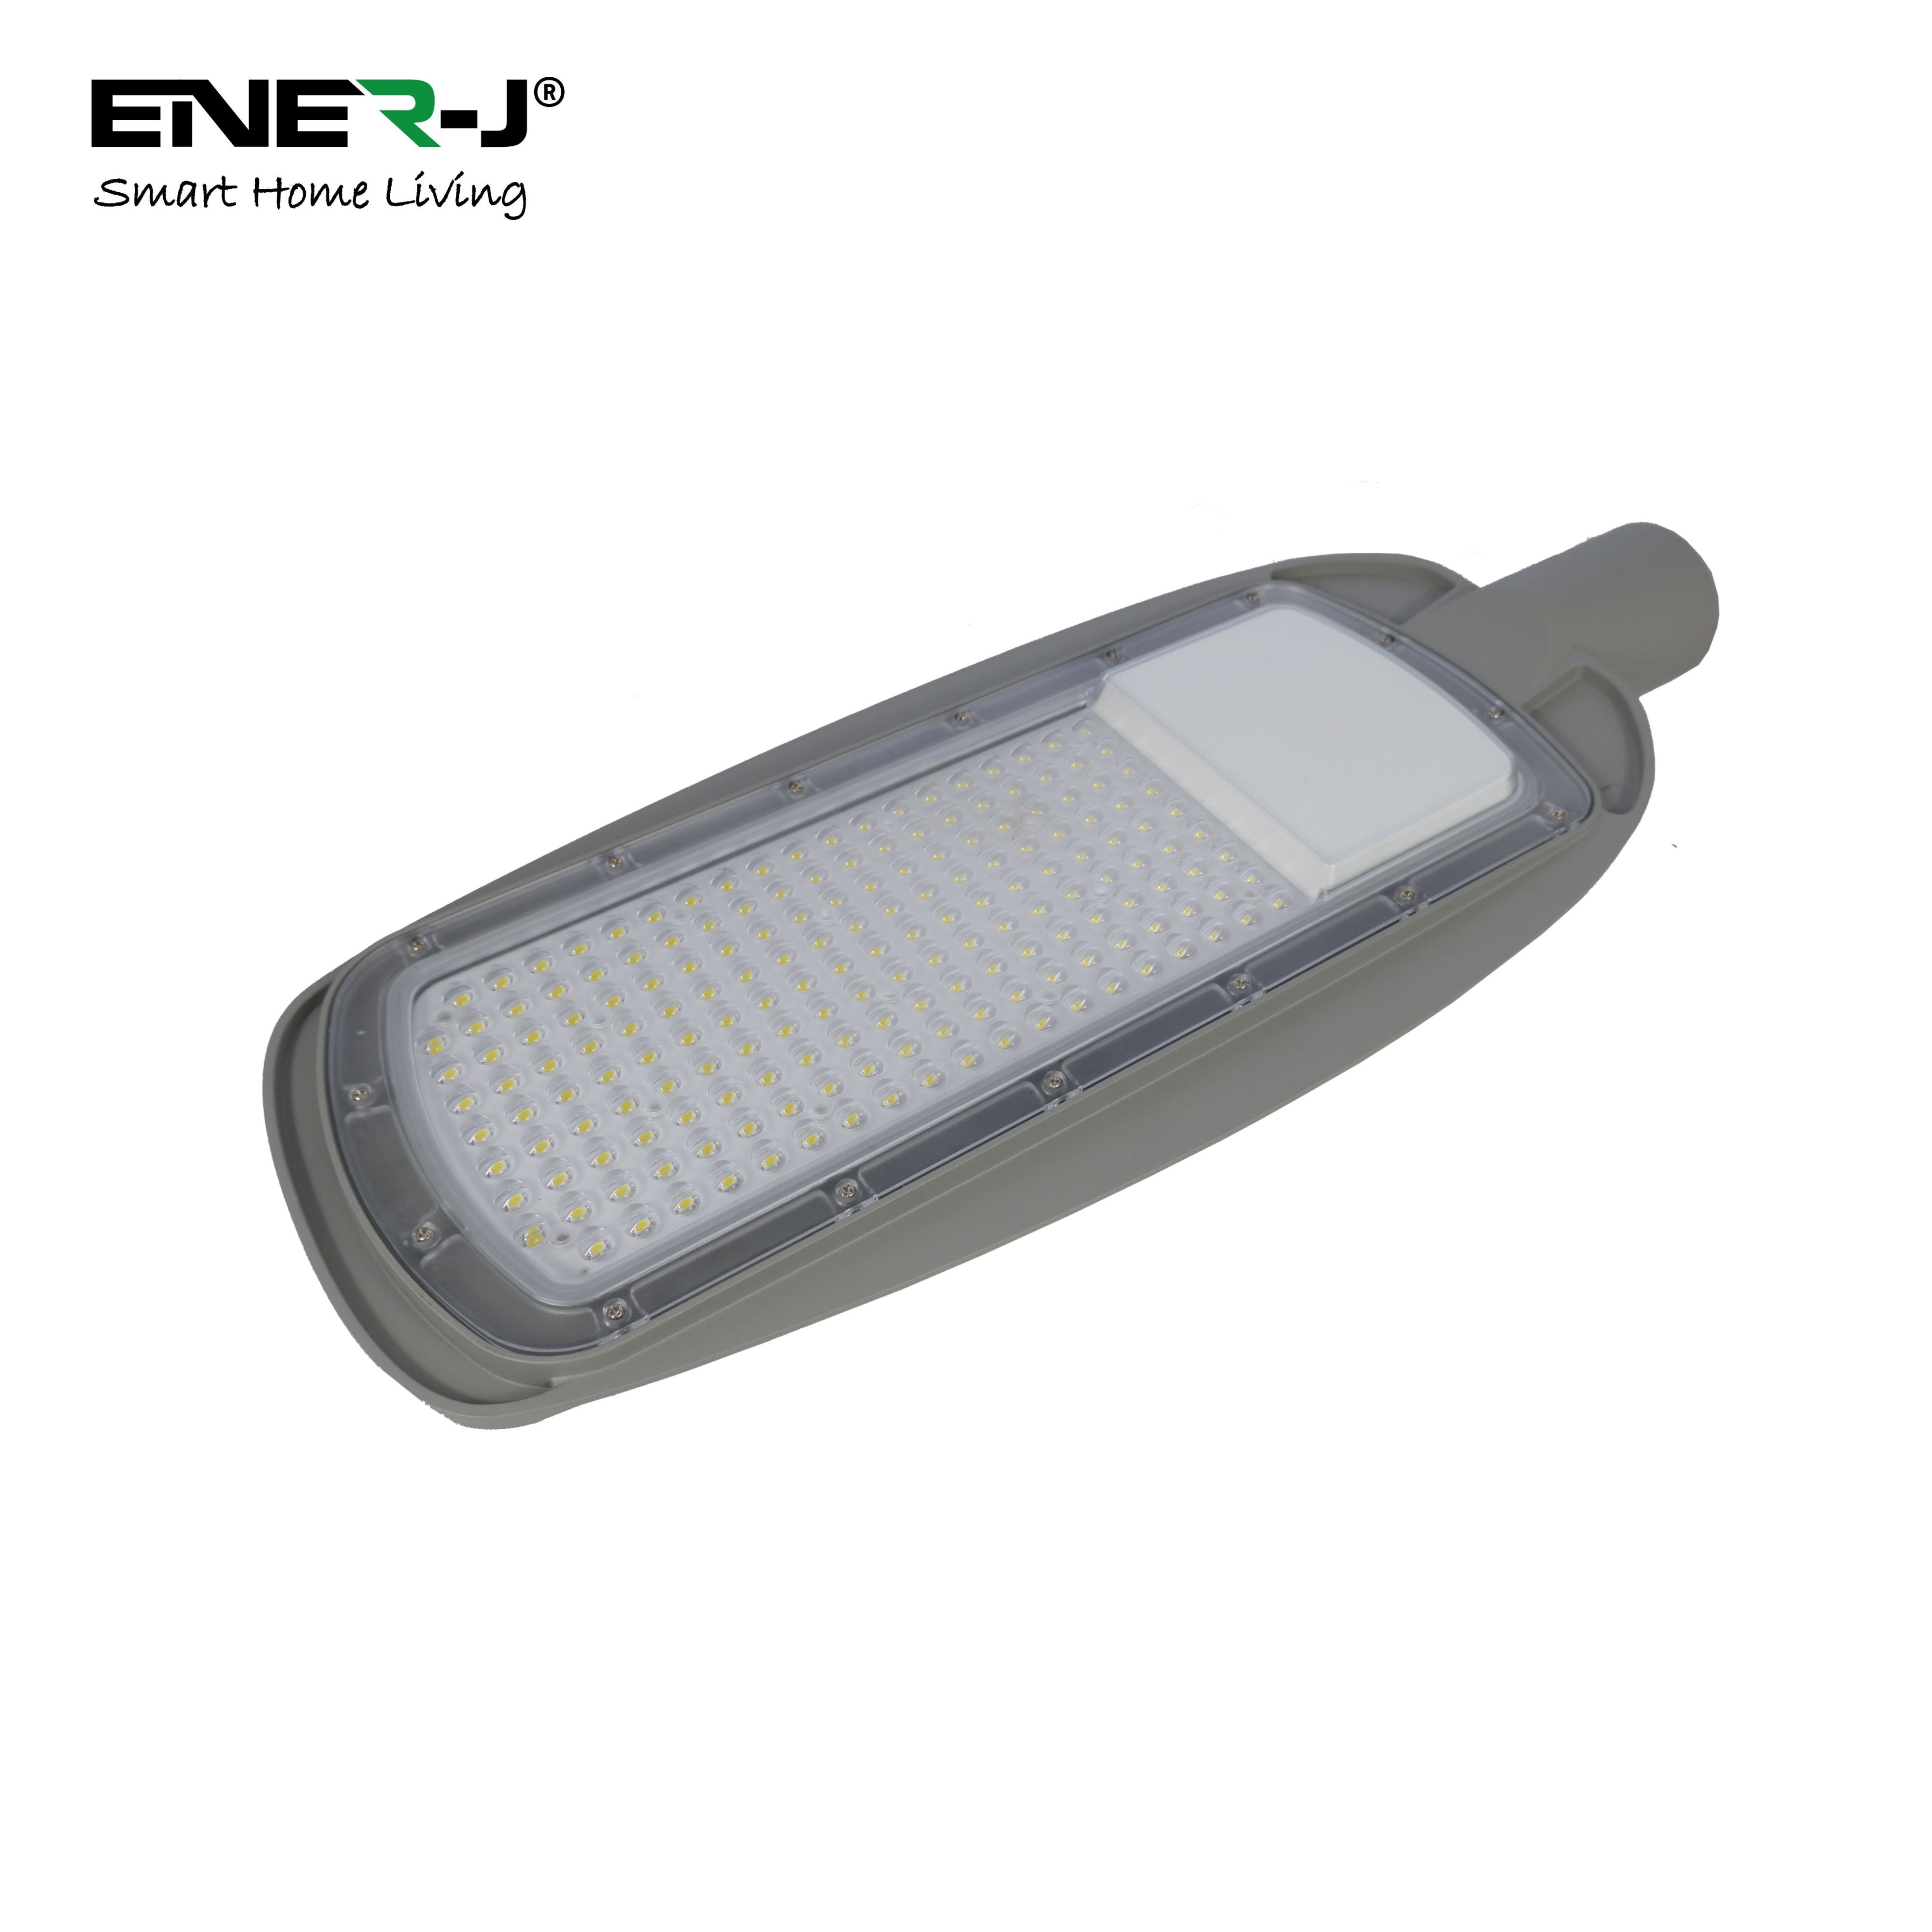 150W LED Streetlight Waterproof IP65 6000k Wall Light, Ideal Street Lamp To Install At a Height Of 6-8 Meters, 5 Years Warranty